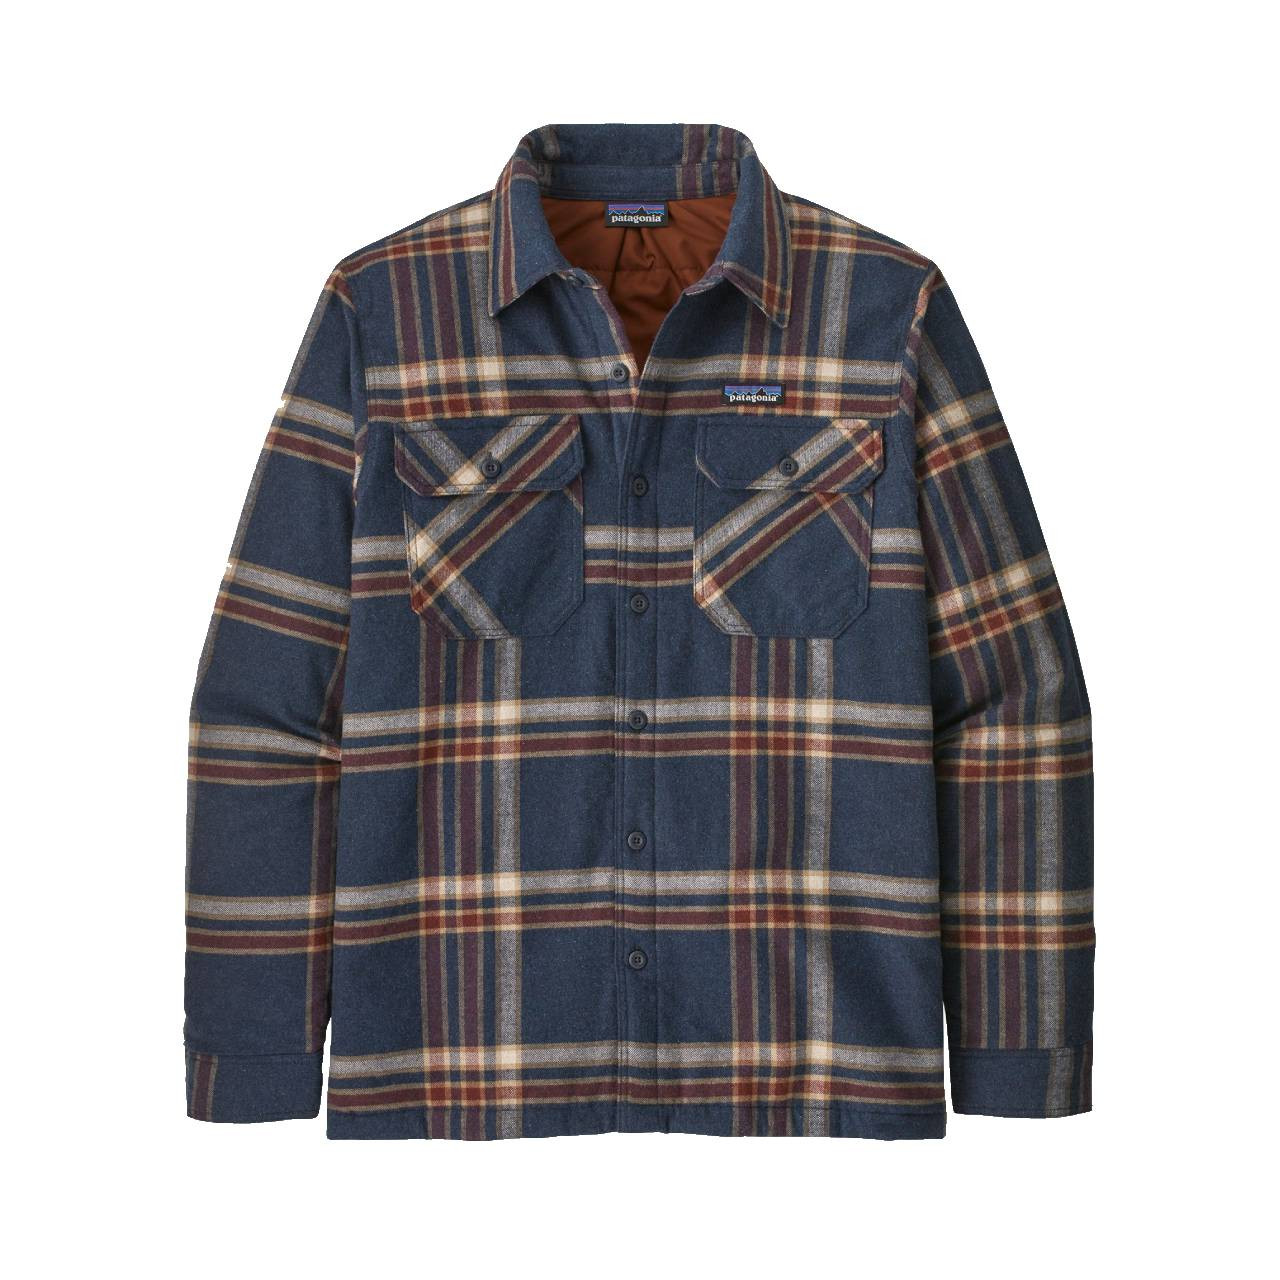 Patagonia M's Insulated Organic Cotton MW Fjord Flannel Shirt - Growlers Plaid:Smolder Blue - XL